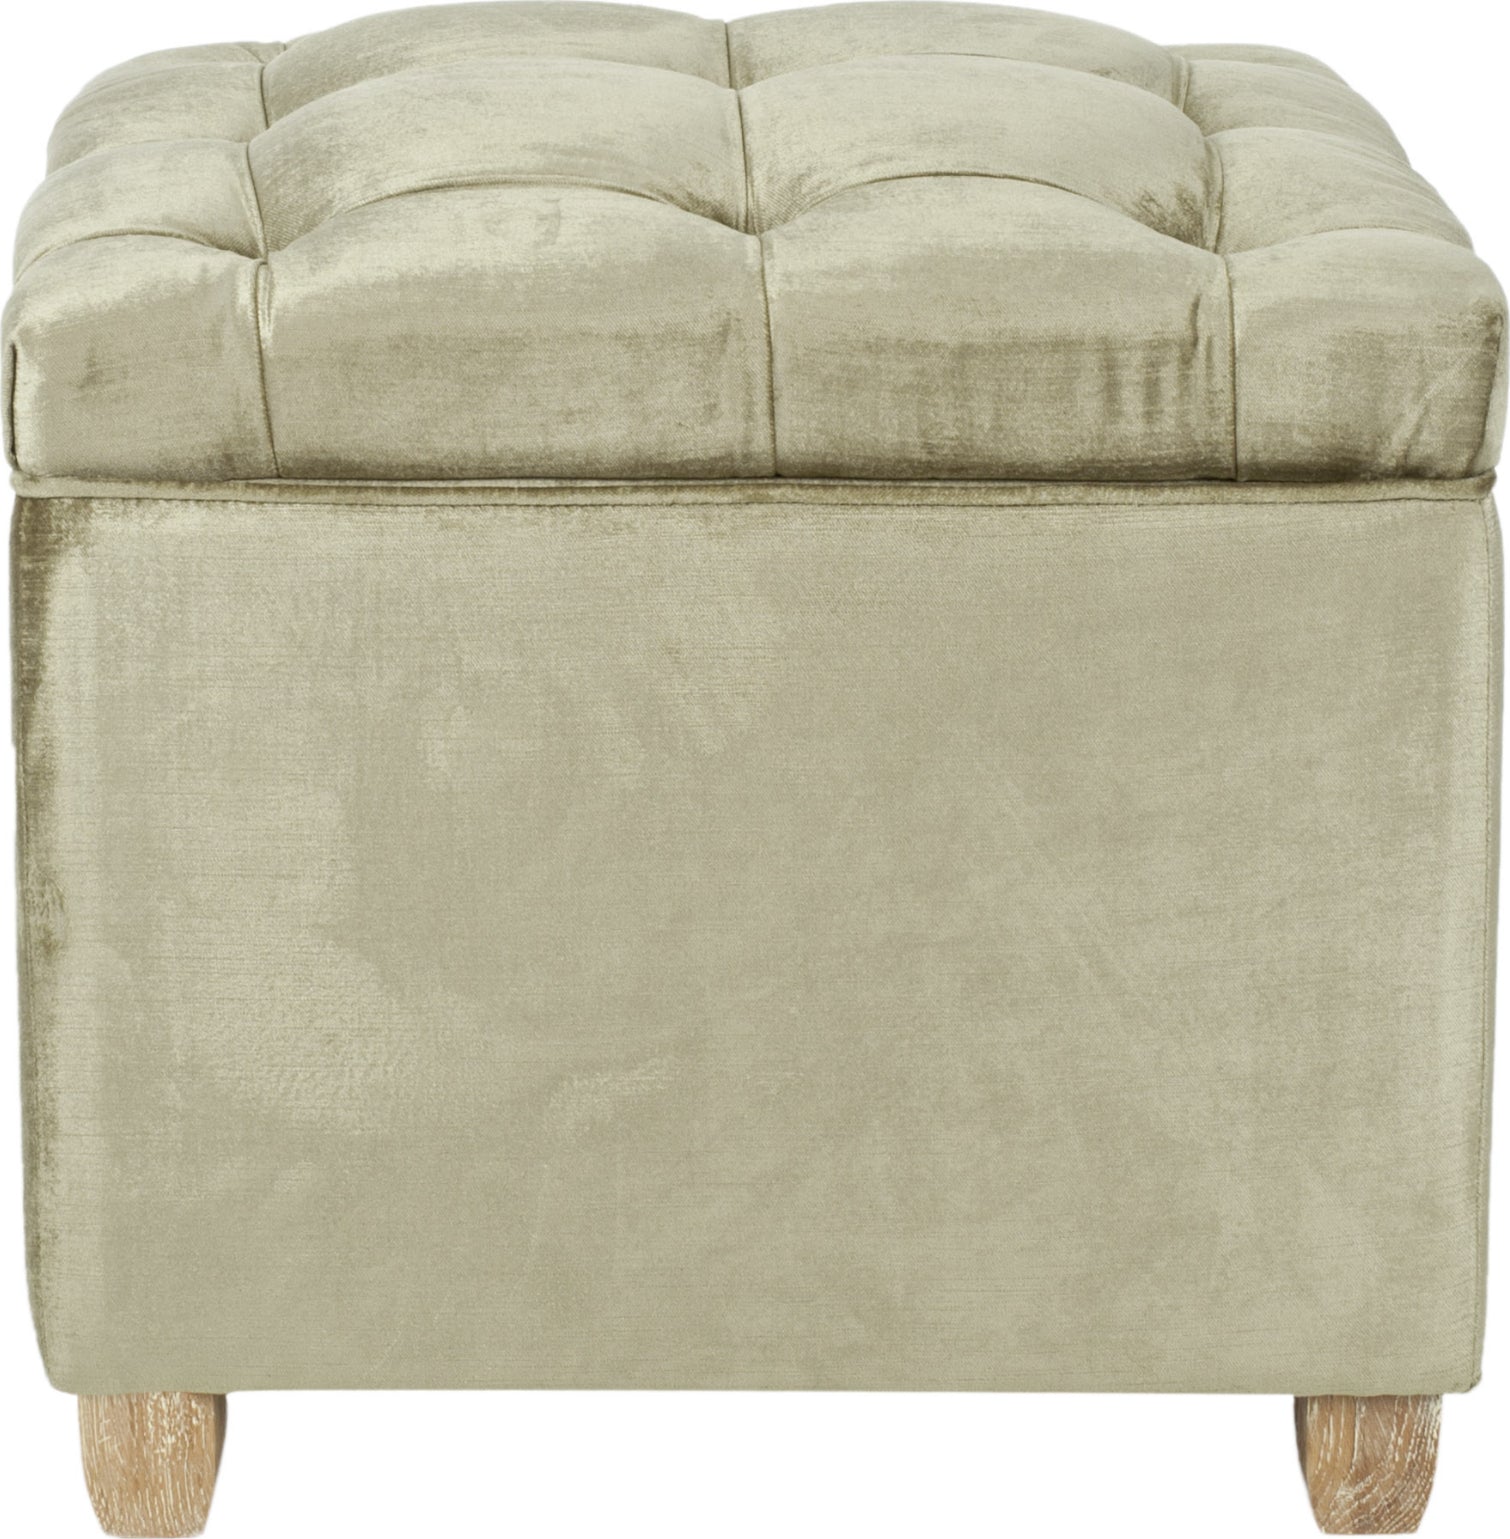 Safavieh Joanie Tufted Ottoman Antique Sage and Pickled Oak Furniture main image